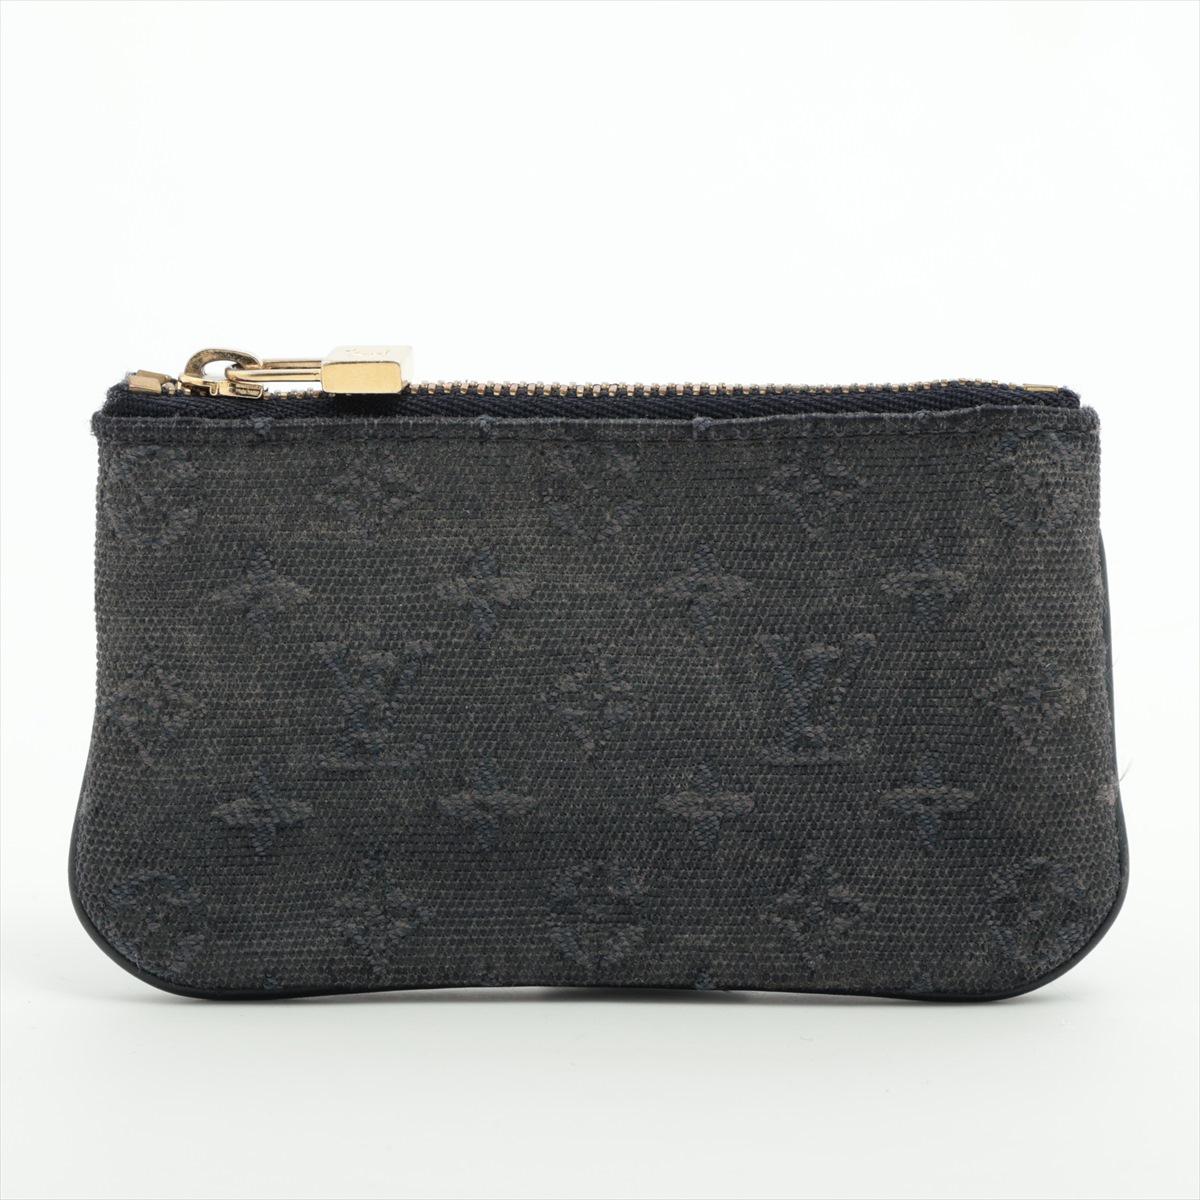 Louis Vuitton Monogram Denim Coin Purse Black In Good Condition For Sale In Indianapolis, IN